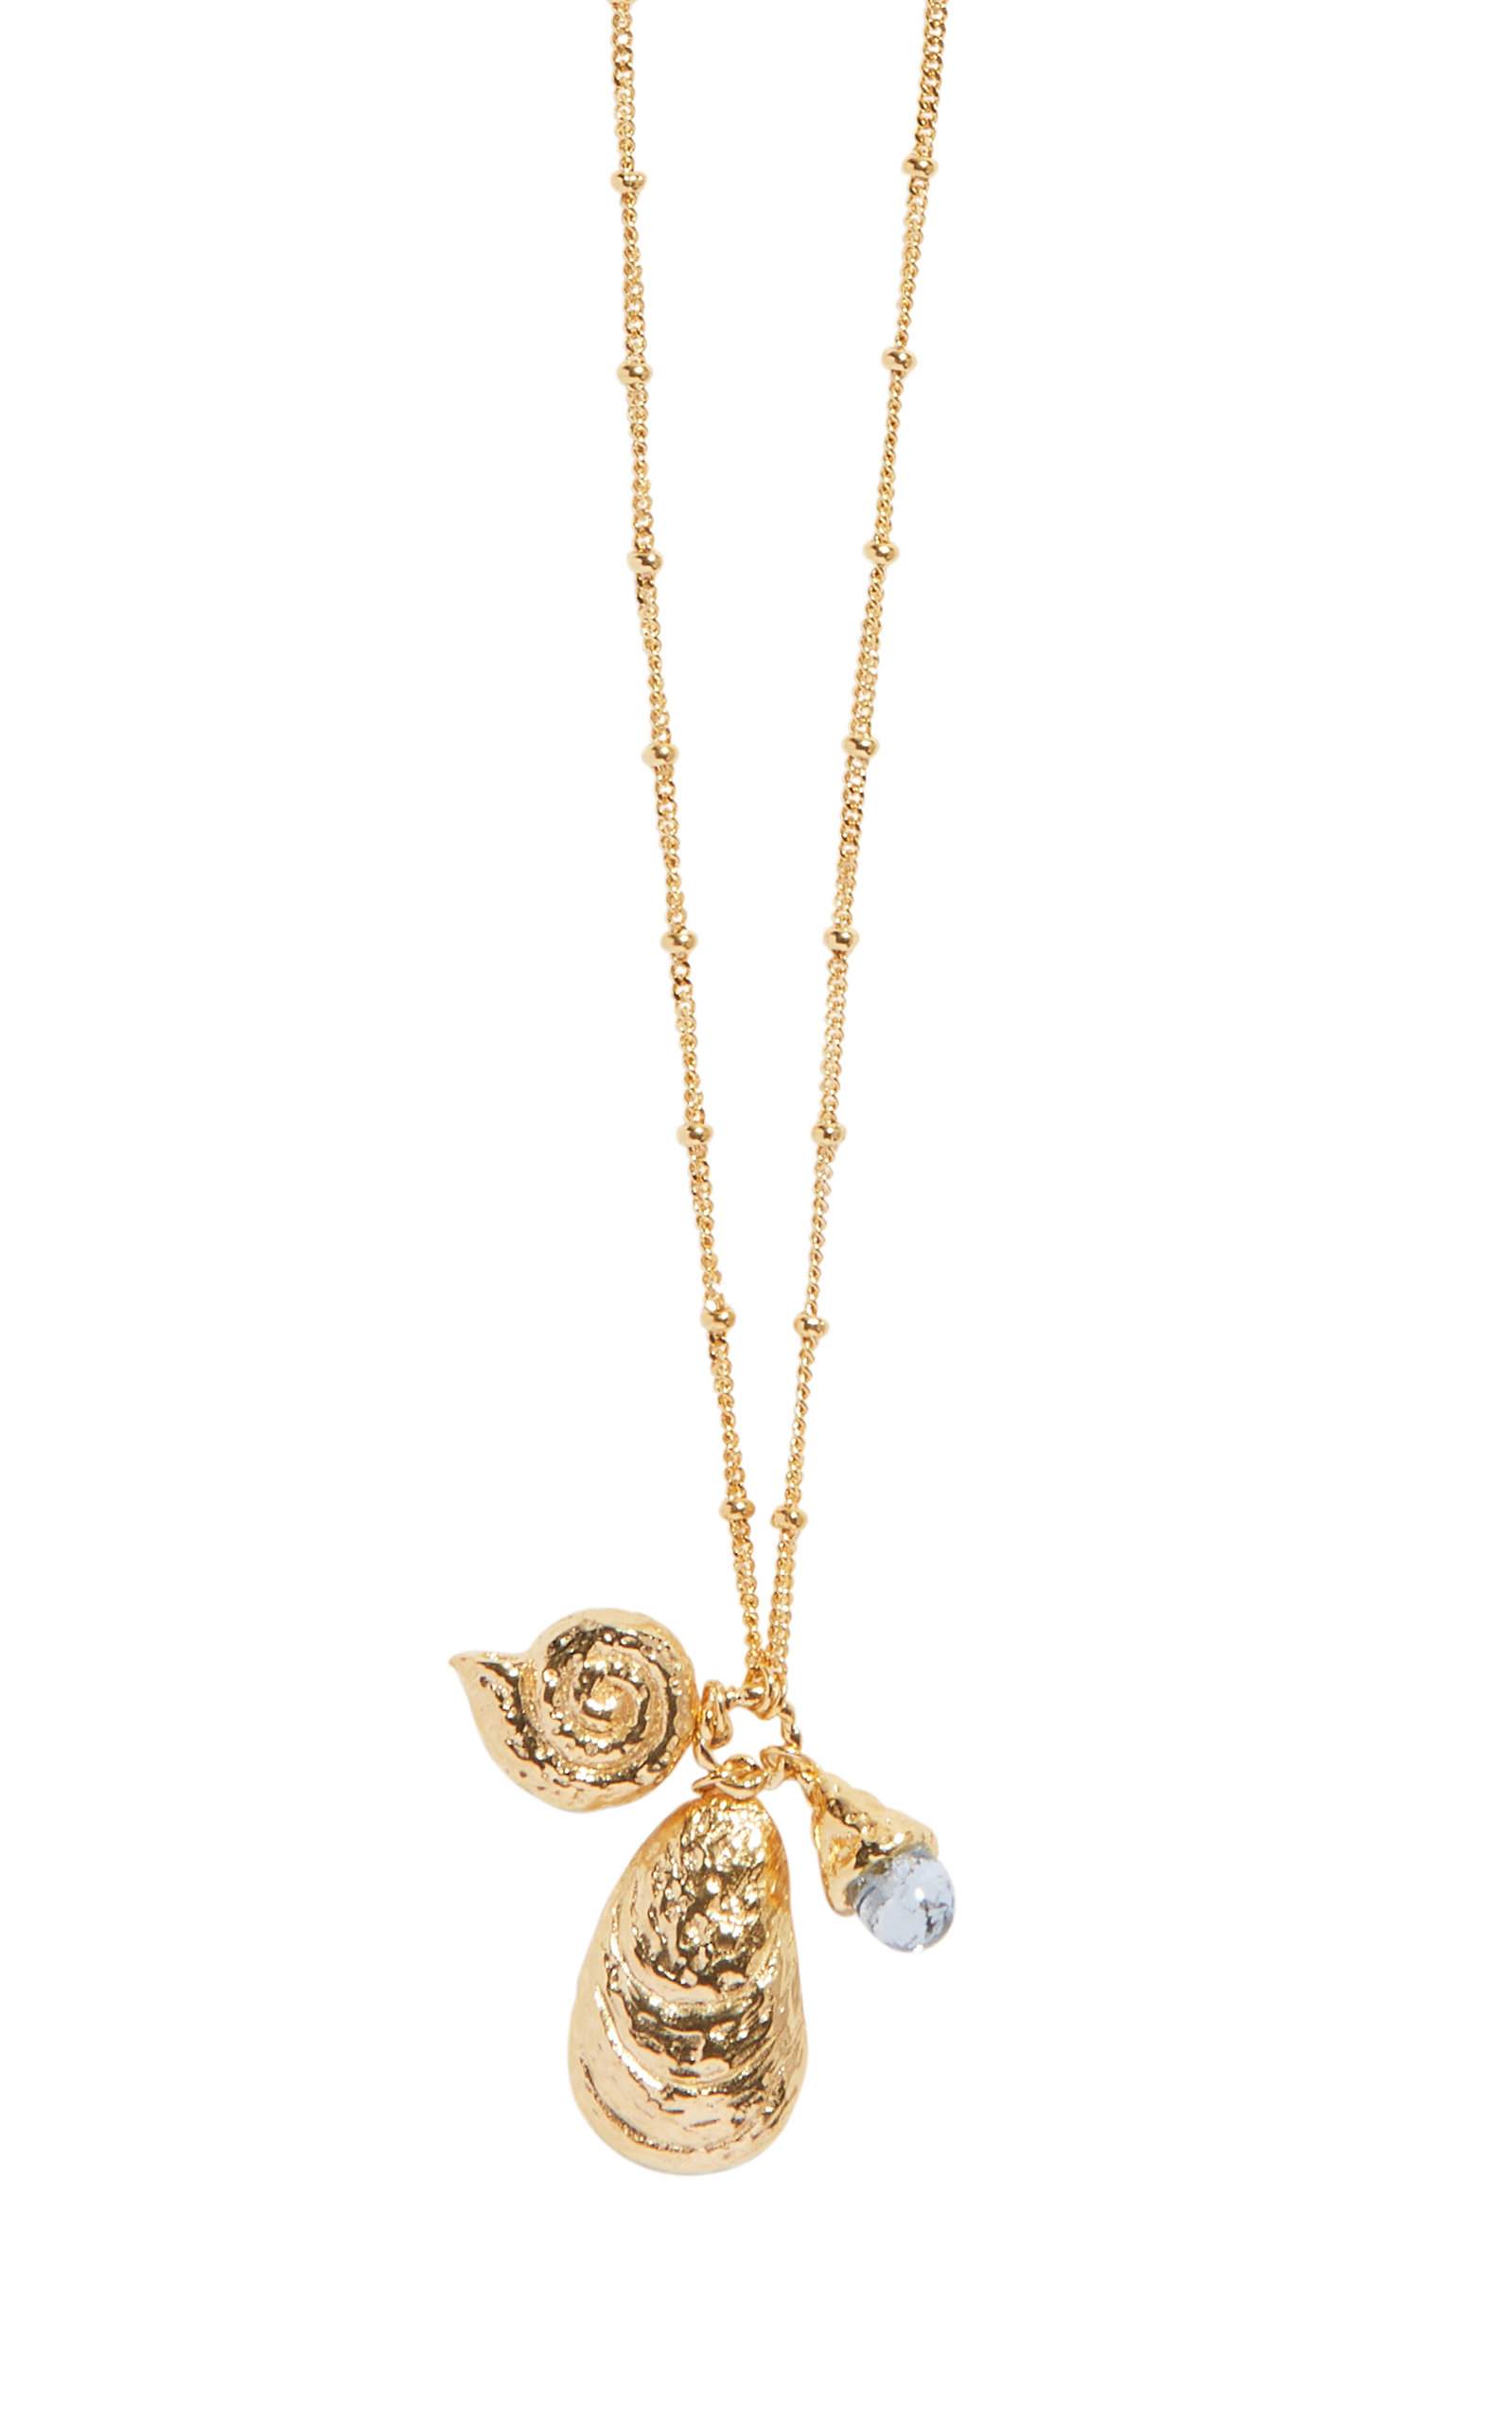 PAMELA LOVE WOMEN'S GOLD-PLATED SHIPWRECK CHARM NECKLACE